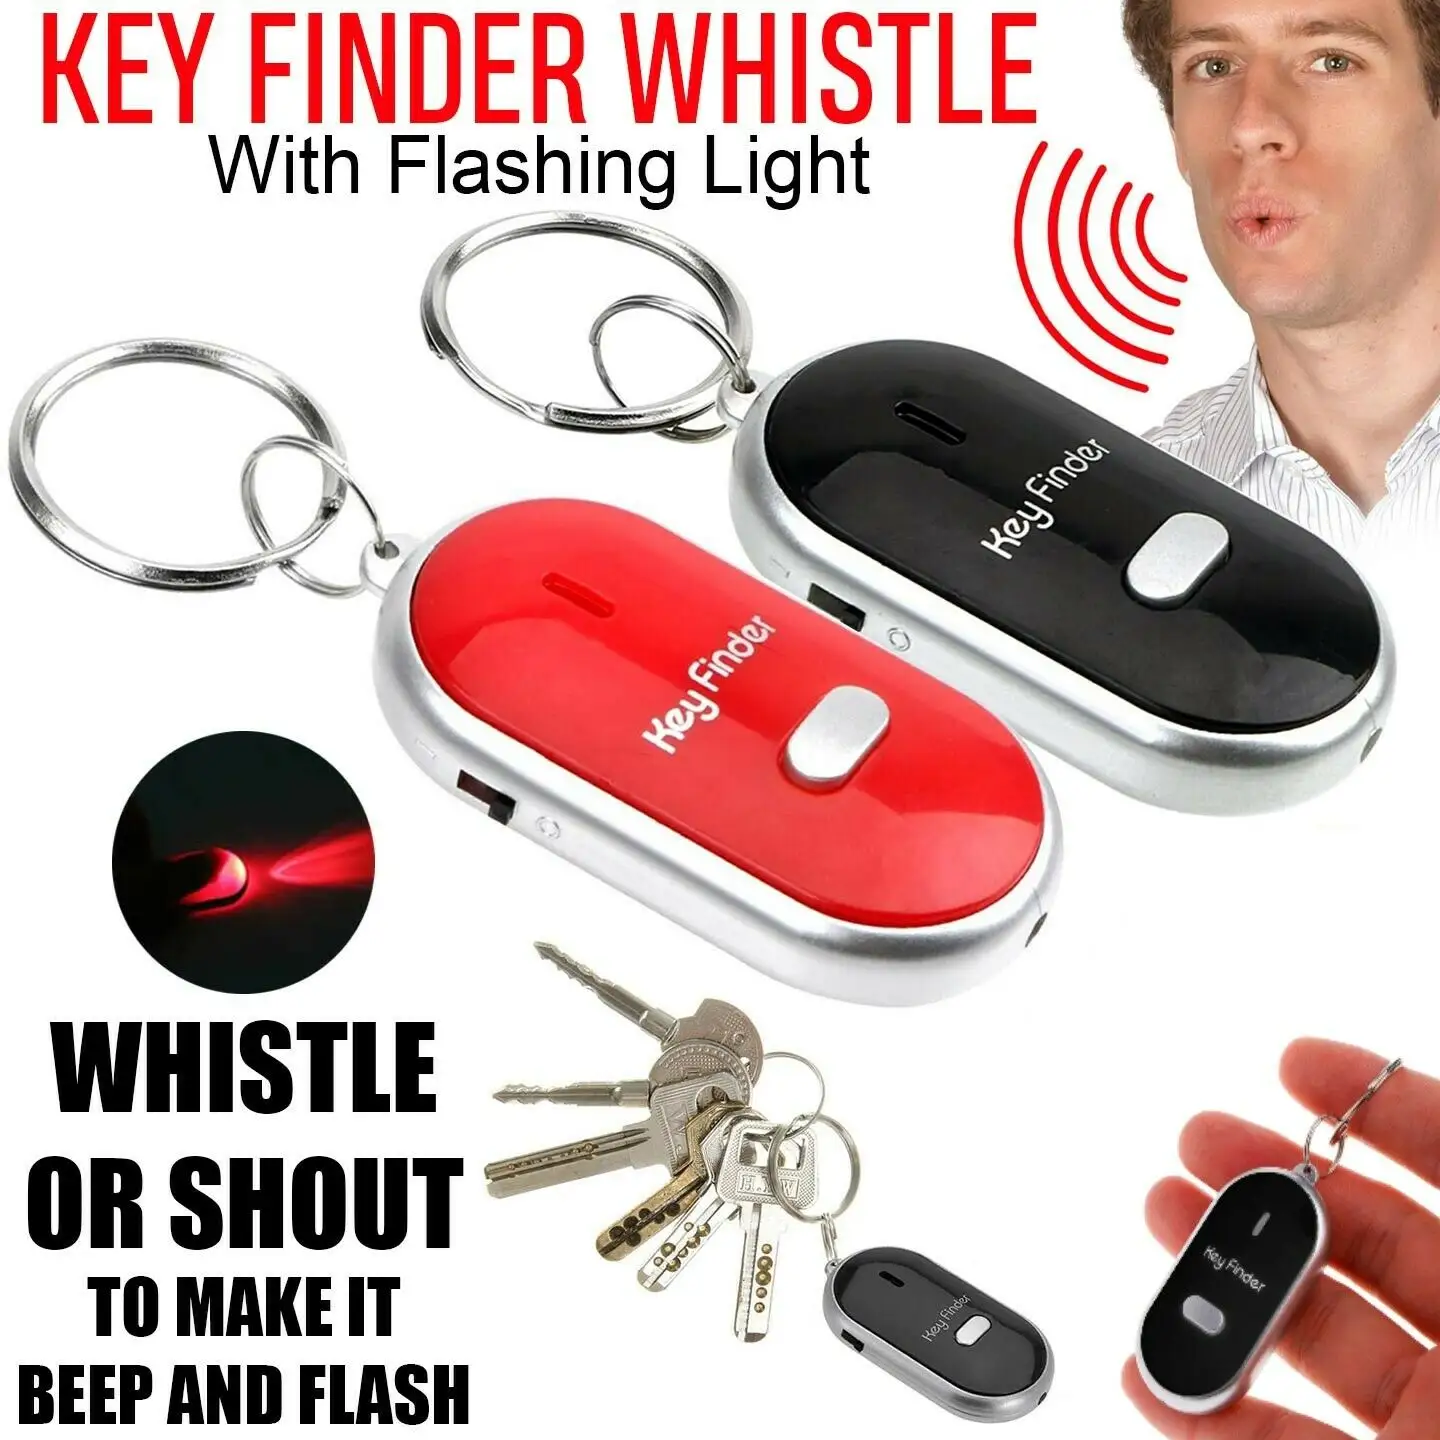 Whistle Lost Key Locator Key Finder Ring LED Flashing Light Remote Control Sonic Torch Keychain Tracker Beeping